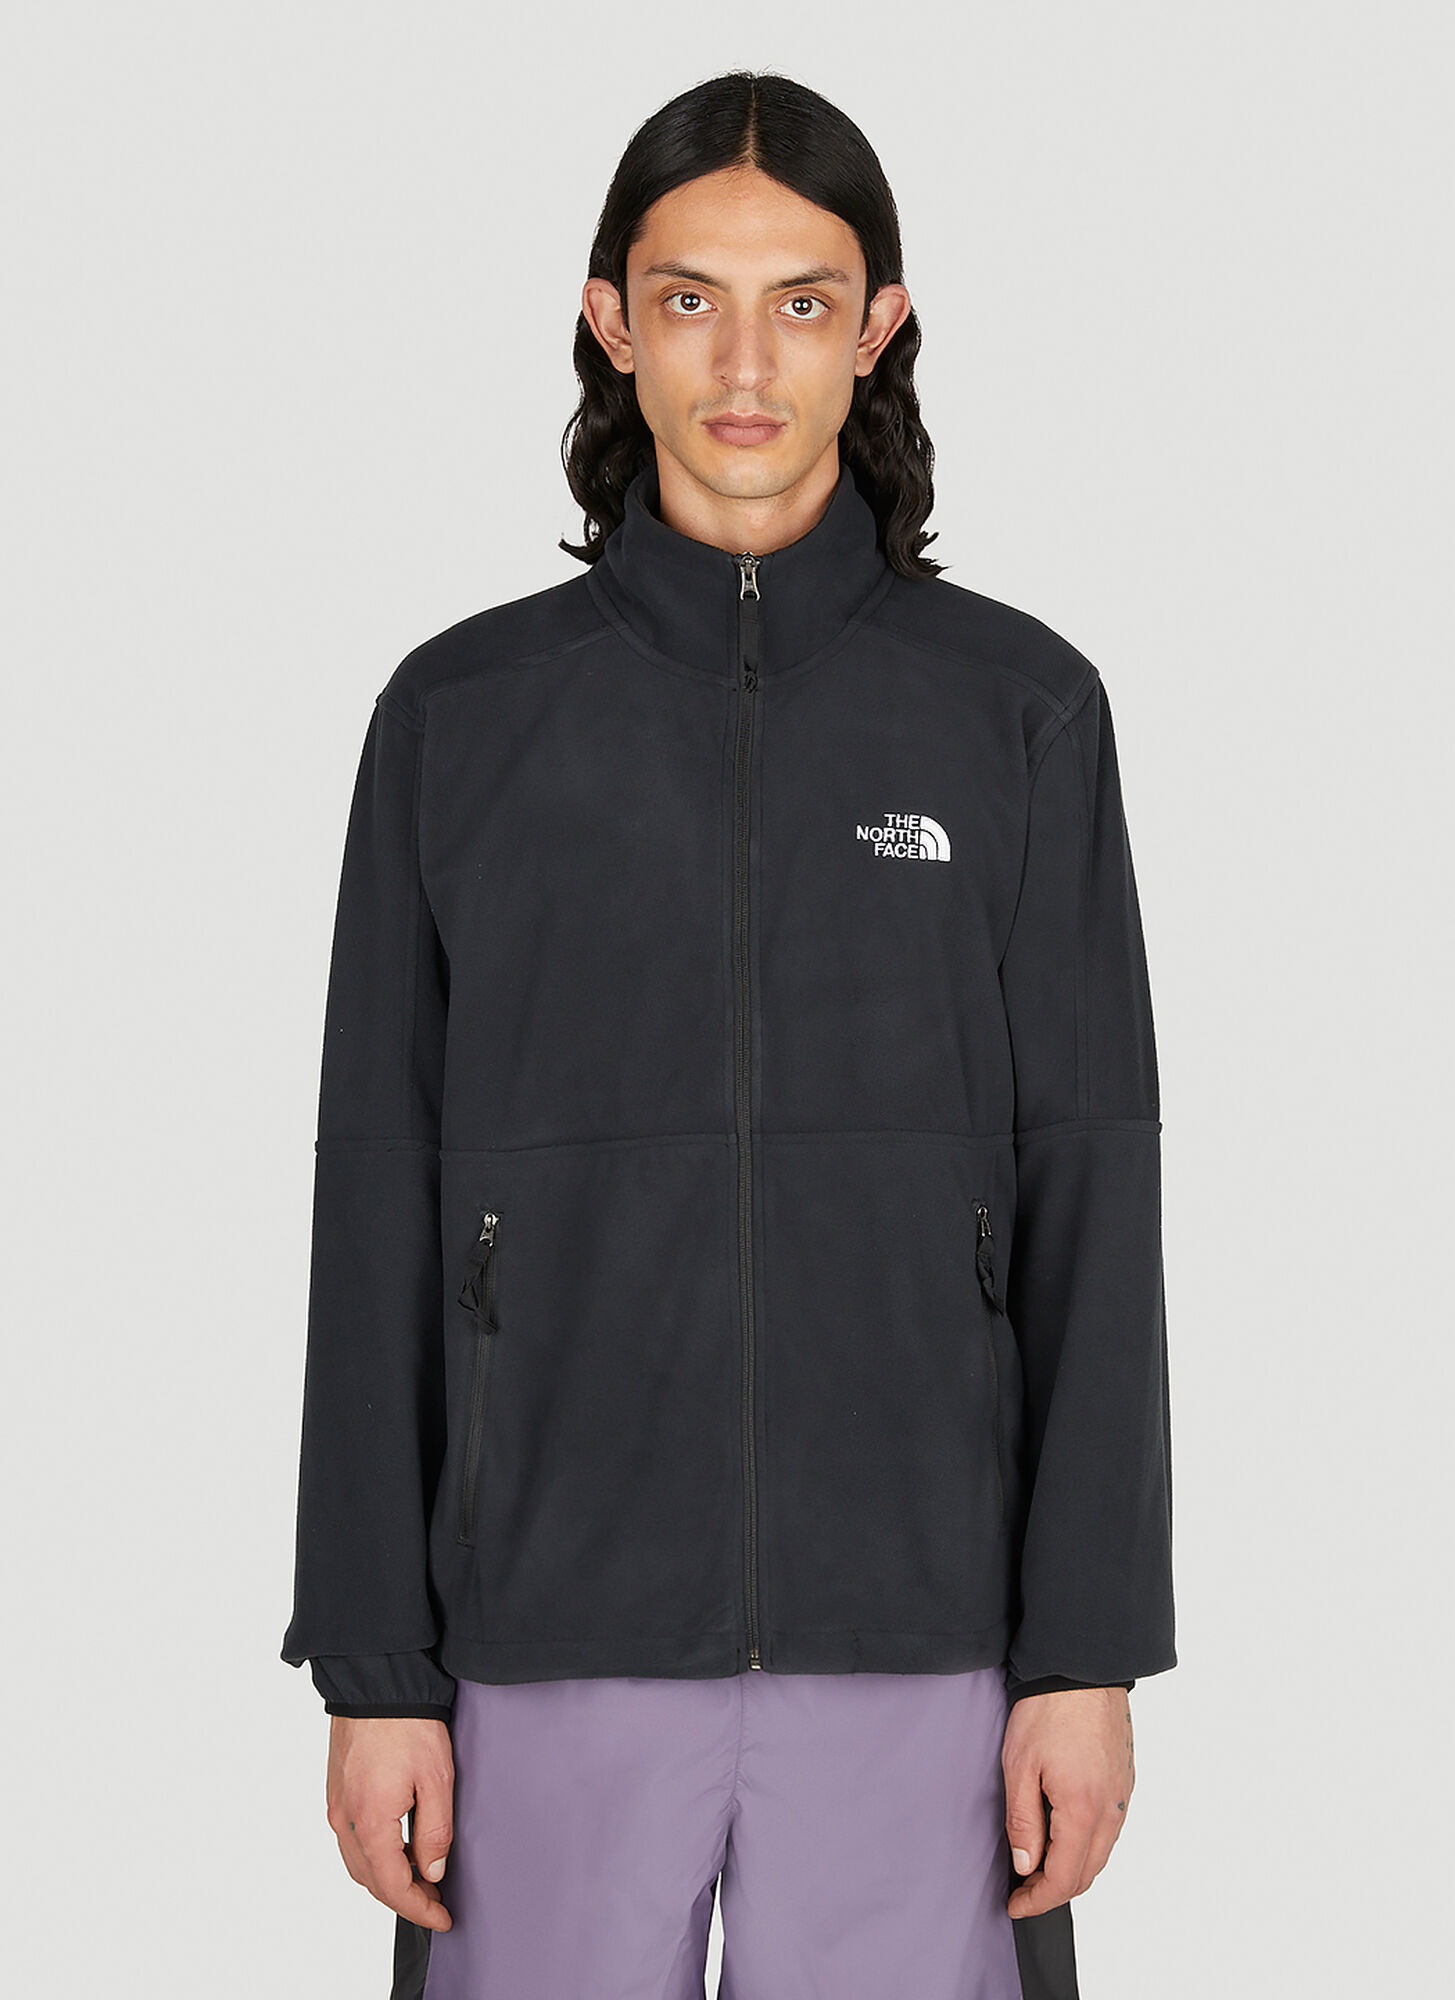 The North Face Cyclone Jacket In Black